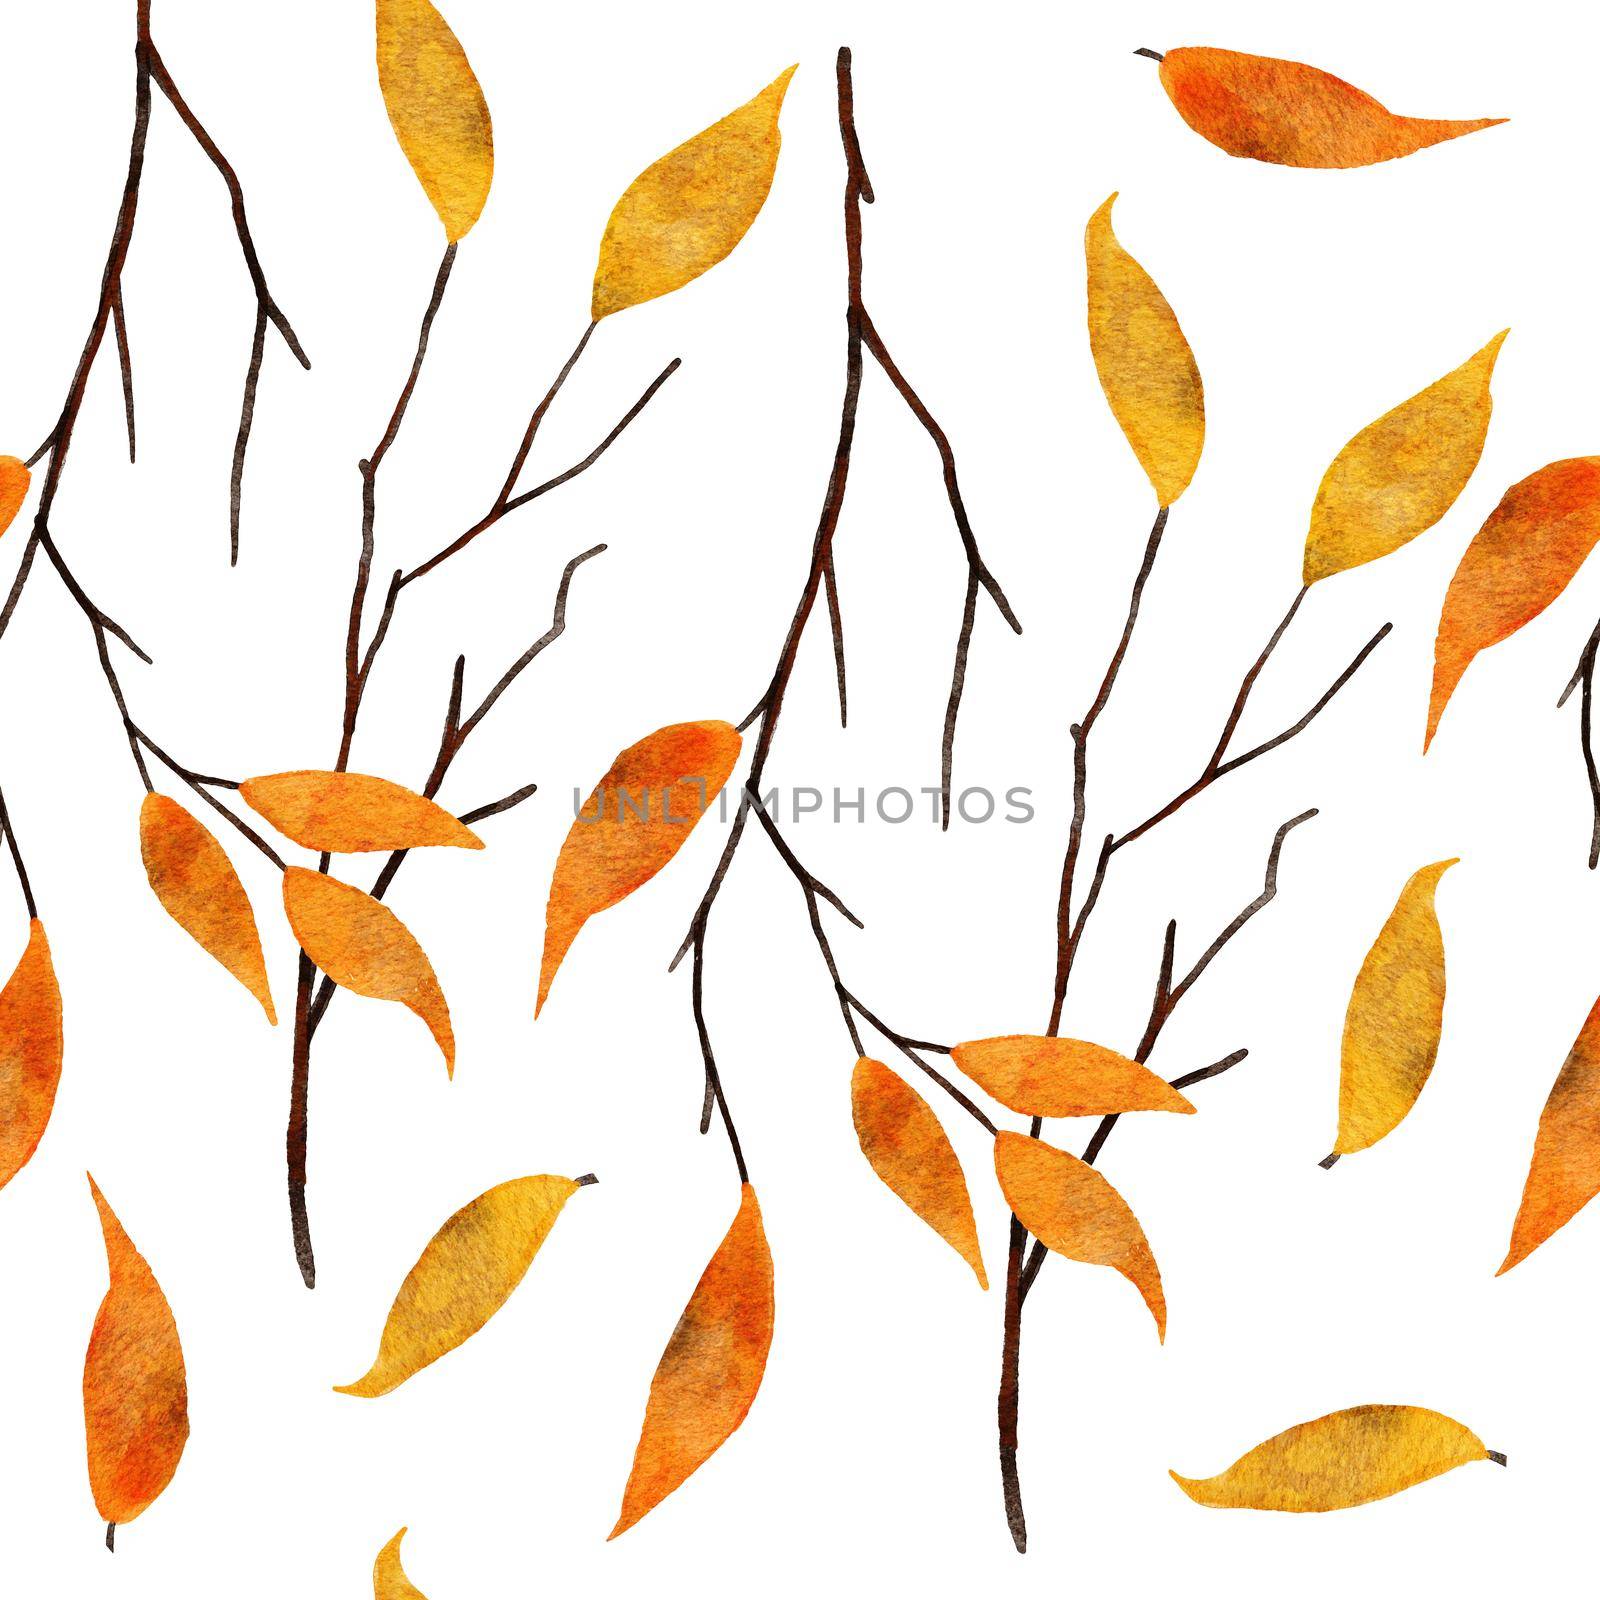 Seamless watercolor hand drawn pattern with yellow orange leaves thin tree branches. Fall autumn september october background. Elegant fabric print on white